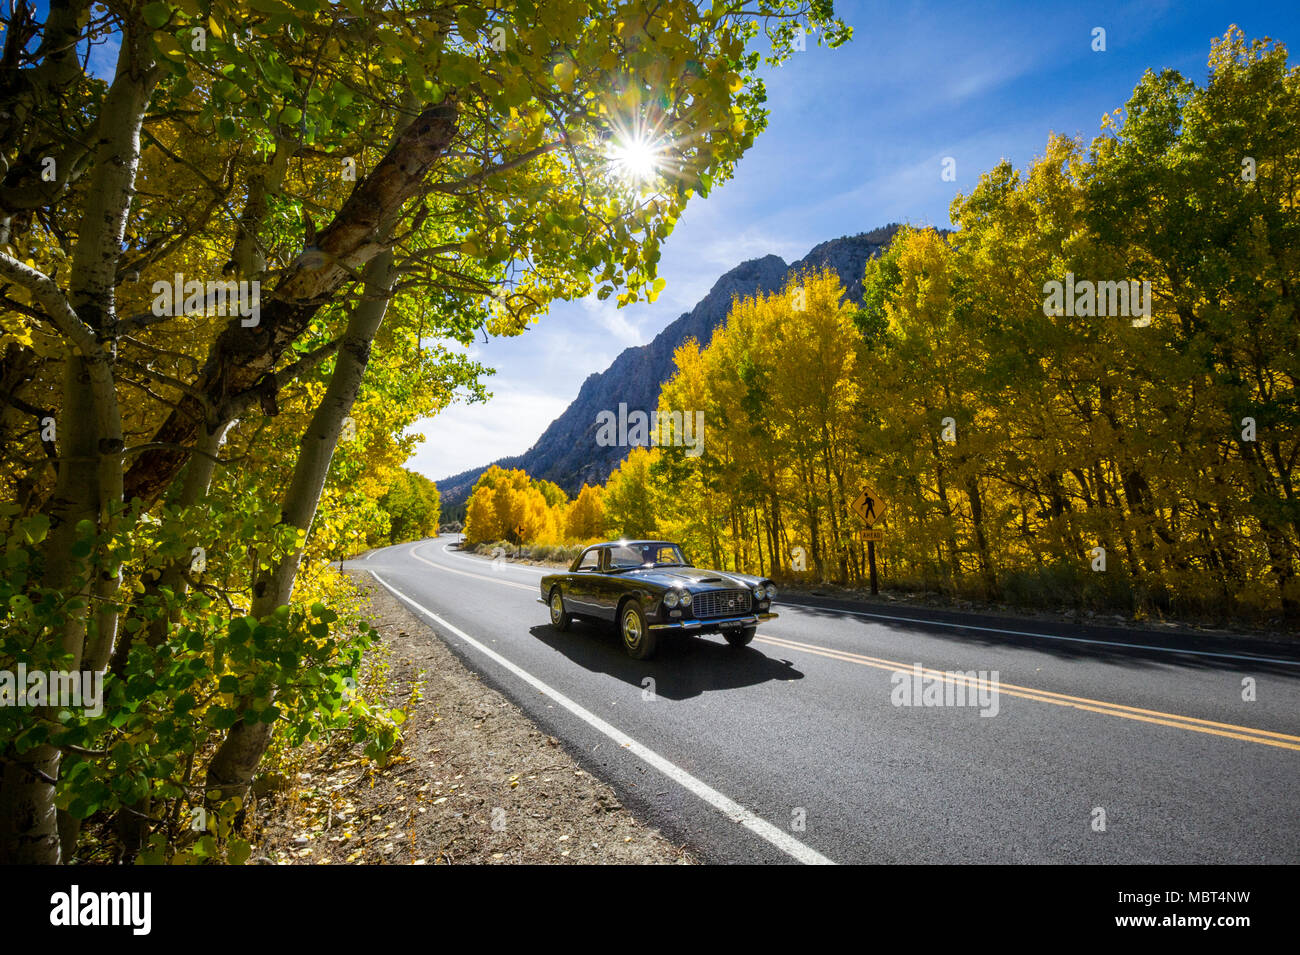 A 1961 Lancia Flaminia car drives through Rock Creek Canyon surrounded by fall color in the Eastern Sierra near Toms Place, California. Stock Photo